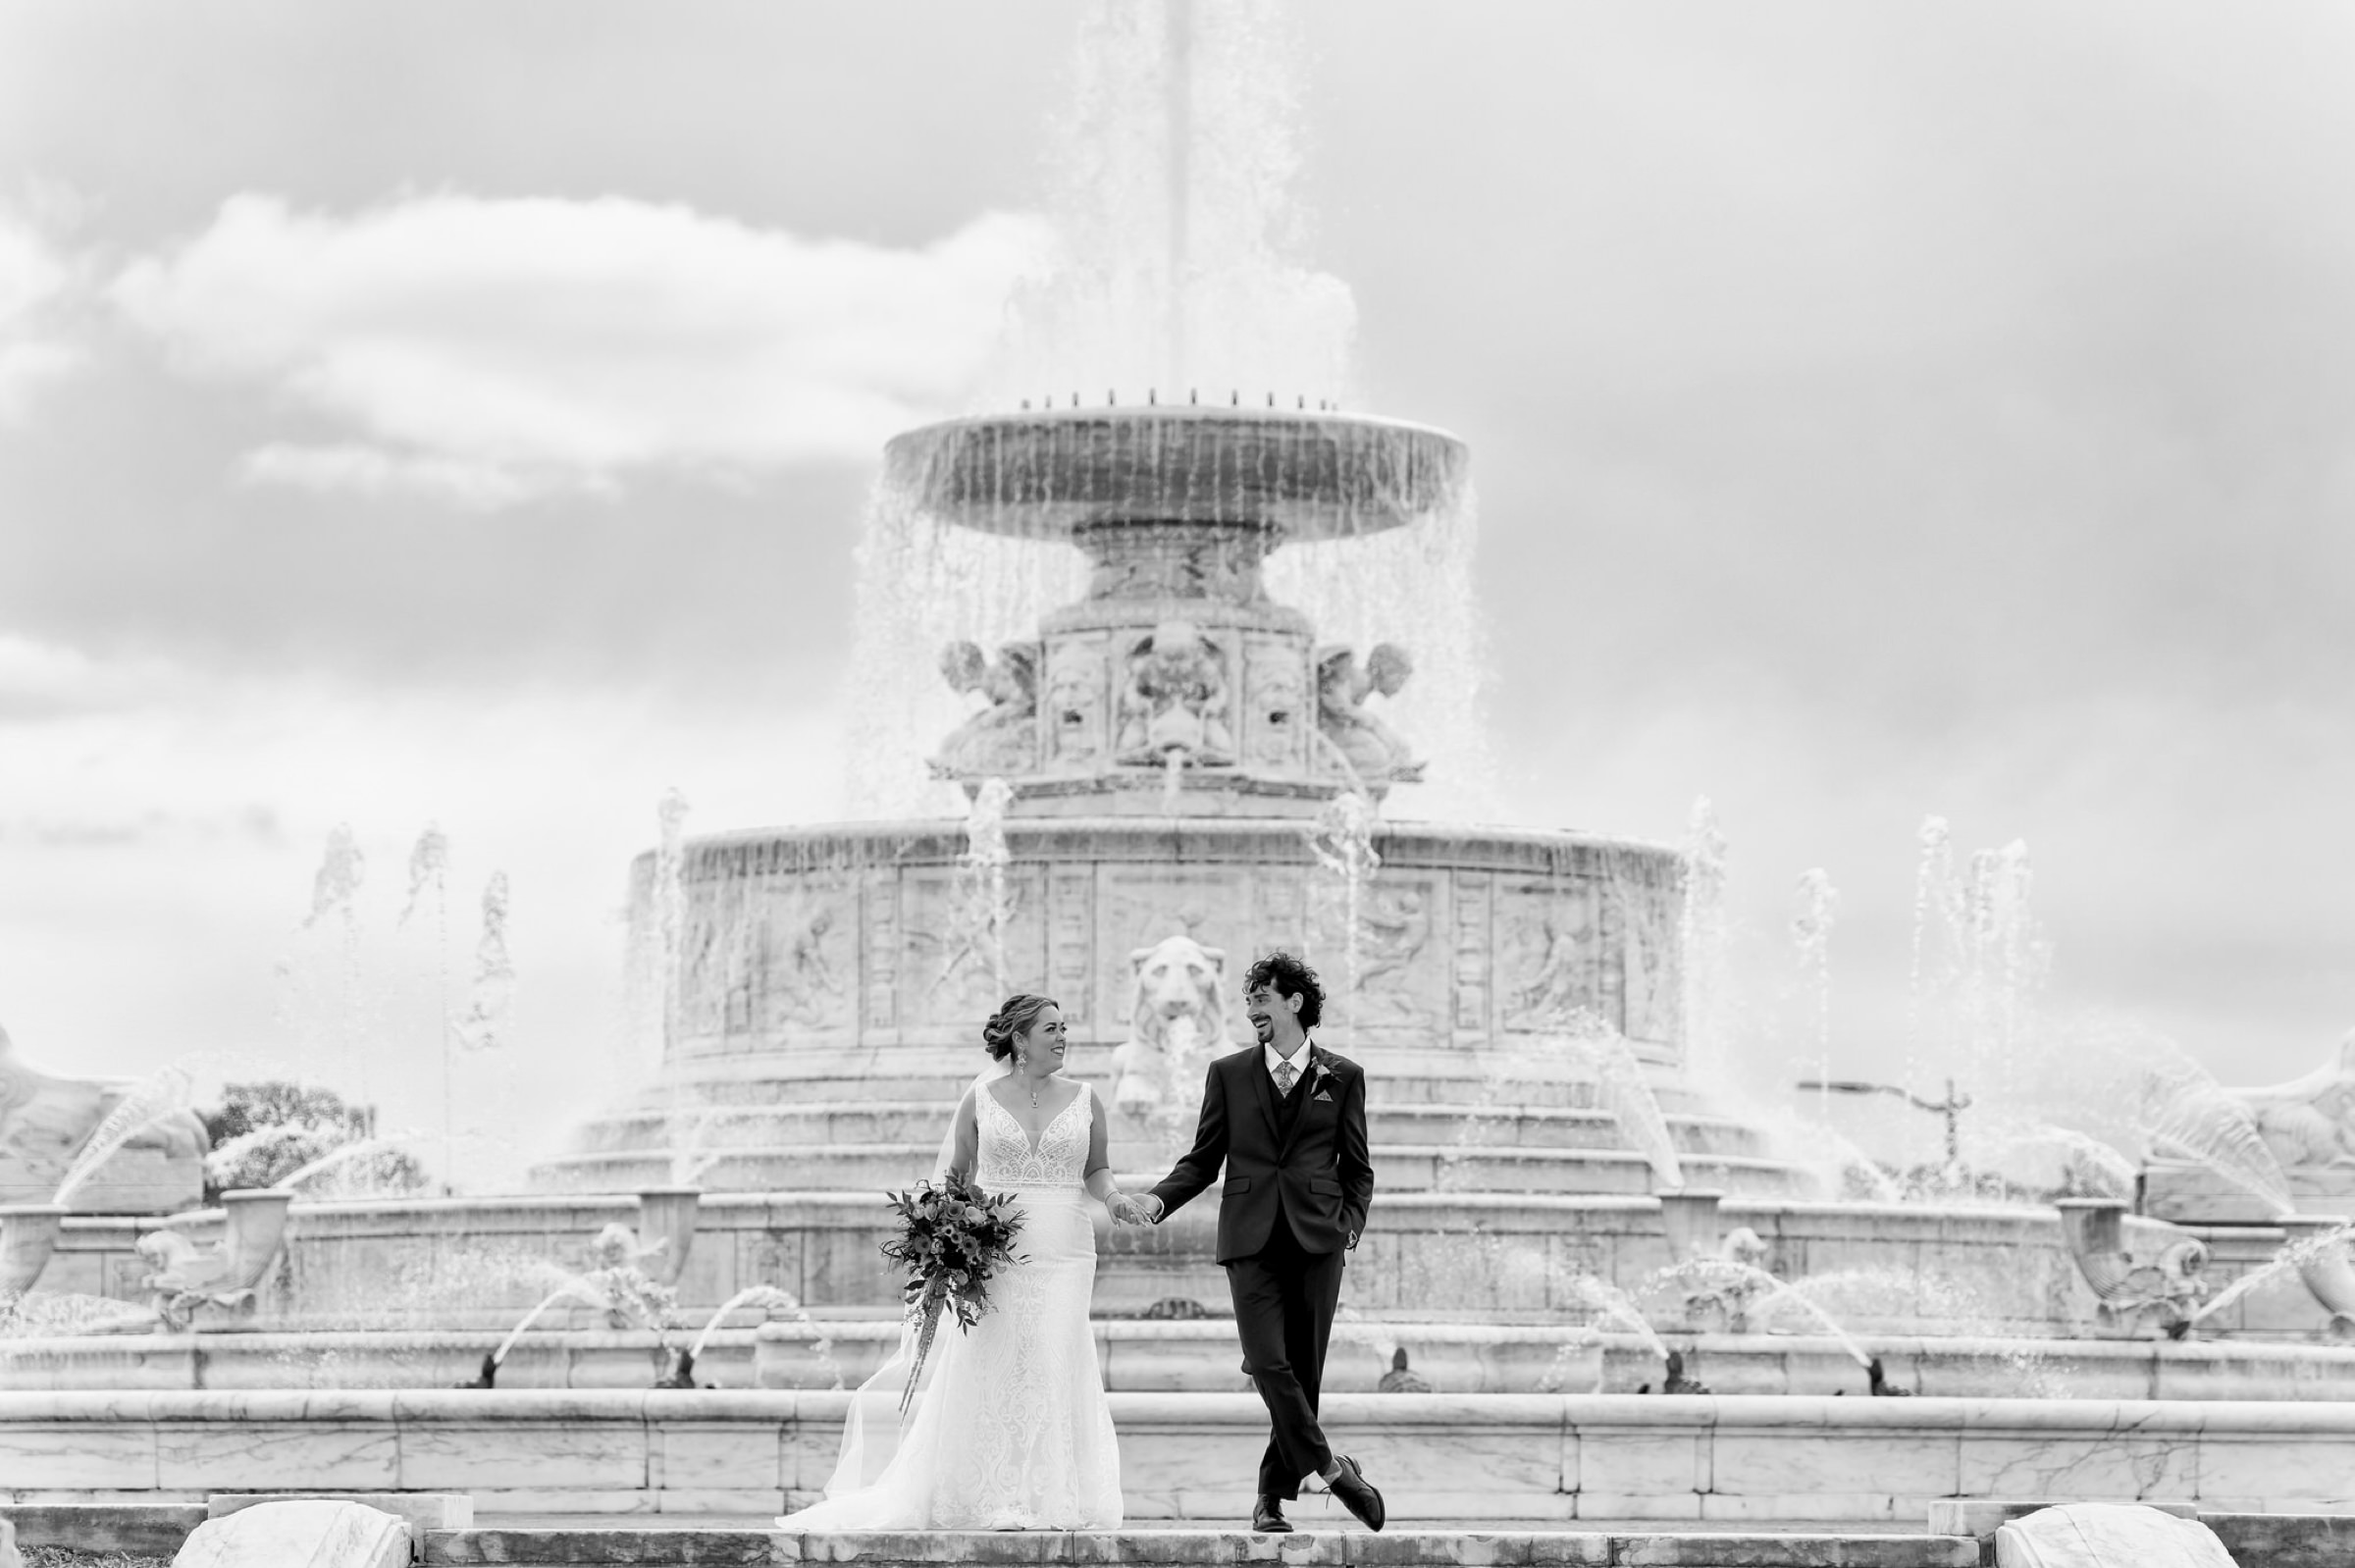 A bride and groom pose in front of the Fountain on Belle Isle.  